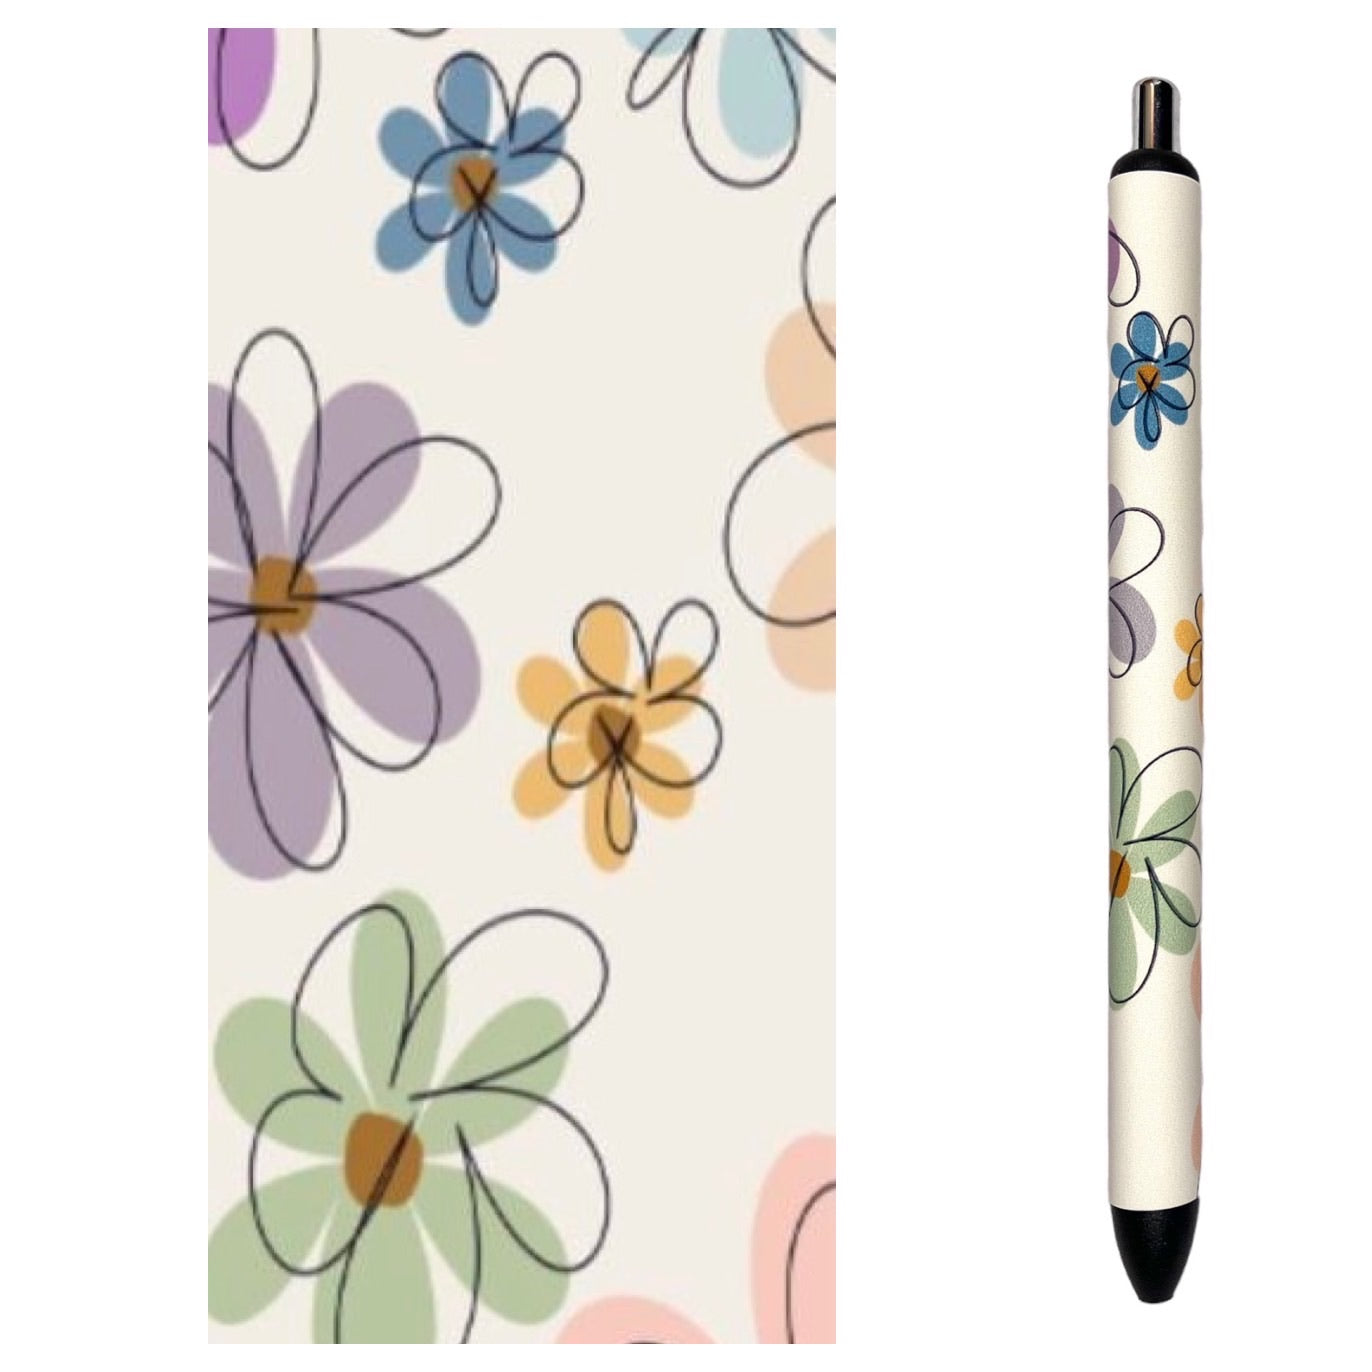 Photo of pen and vinyl design with colored doodled pens